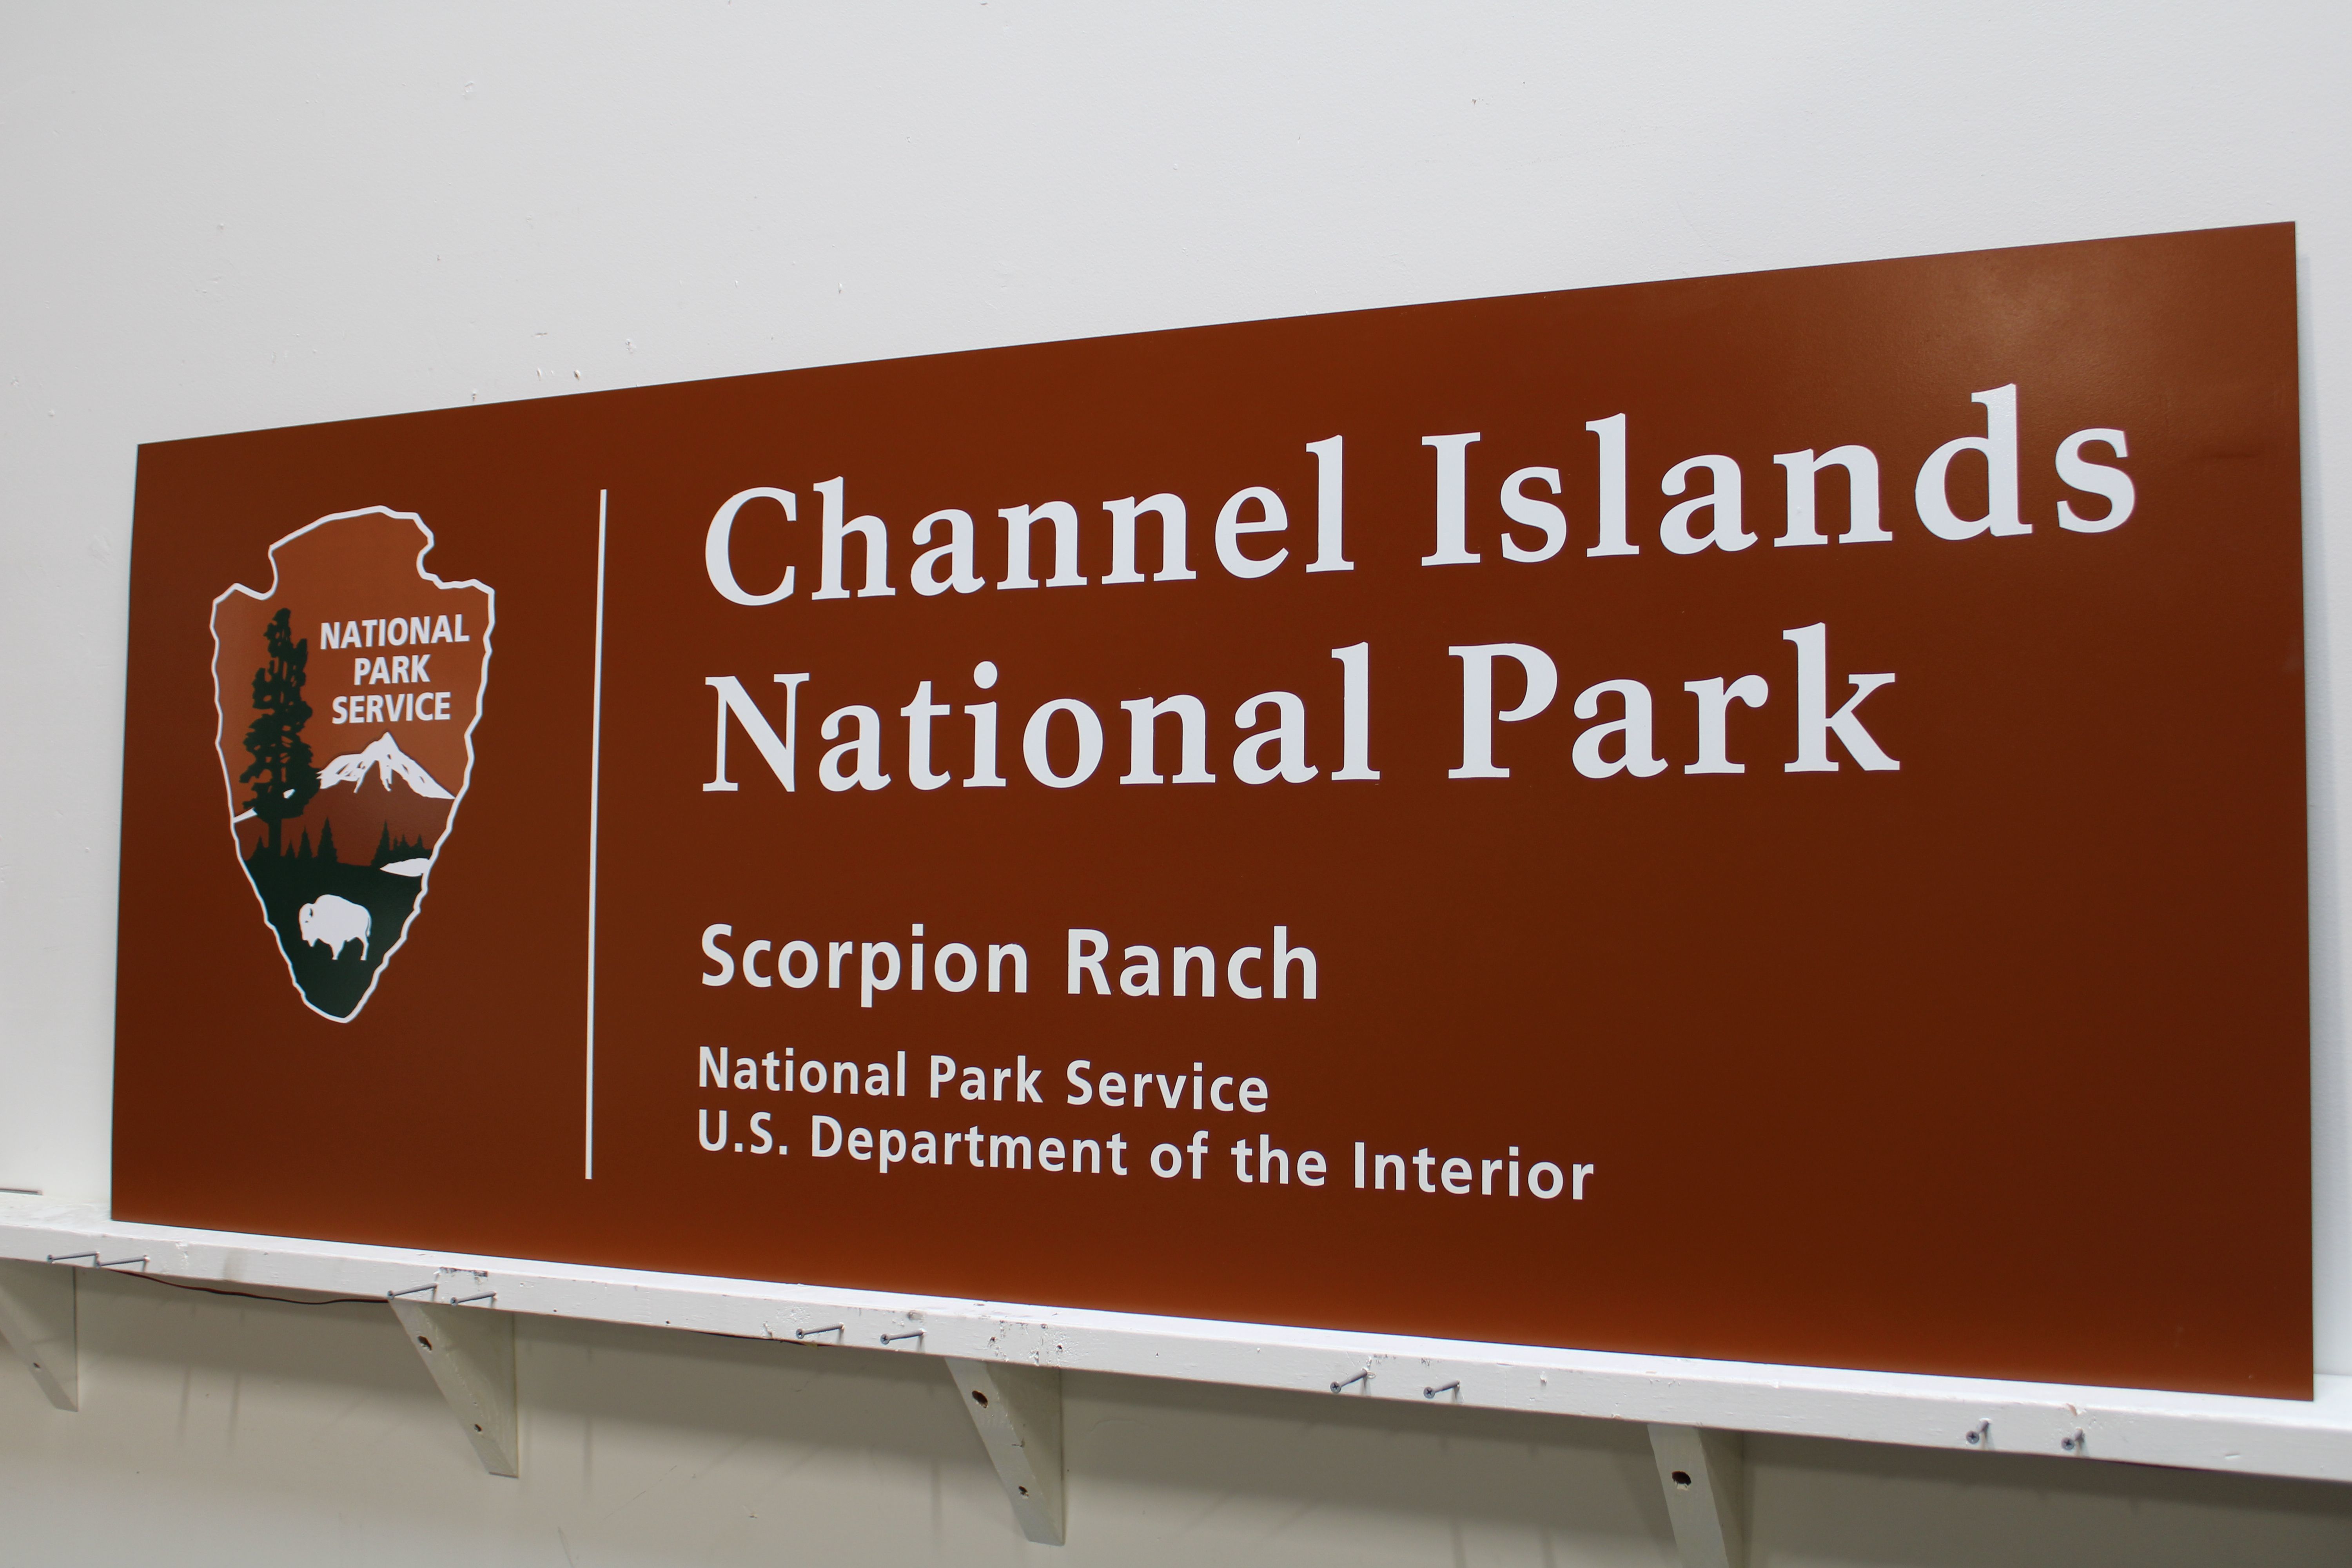 M8010 - Large Single-faced Aluminum Wall Sign  for  Channel Islands National Park 